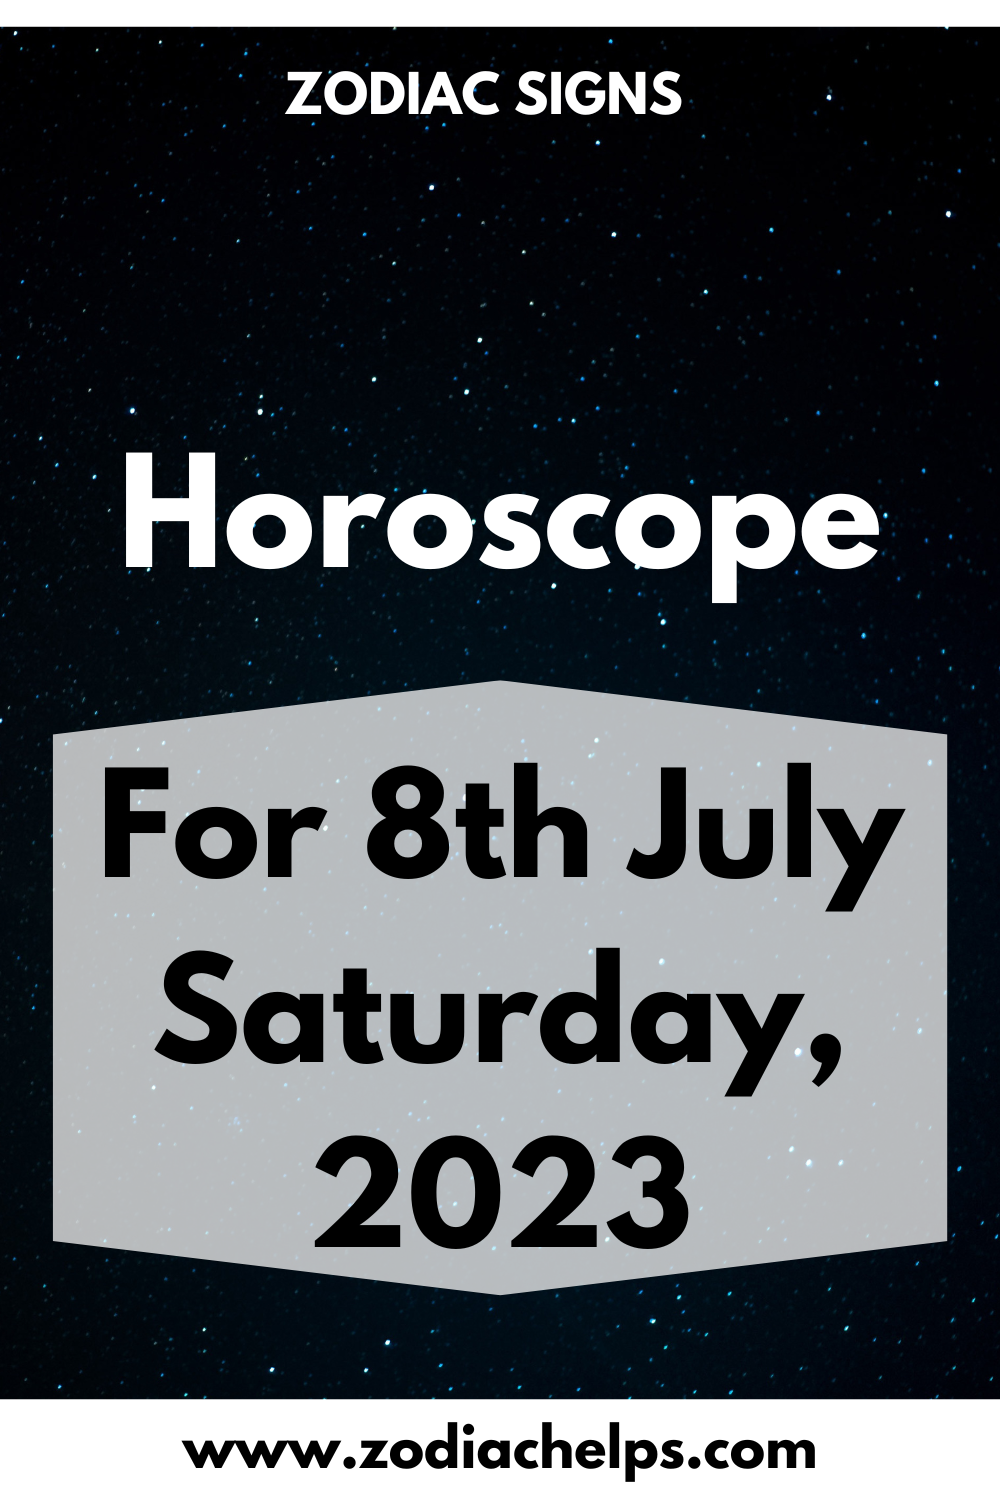 Horoscope for 8th July Saturday, 2023